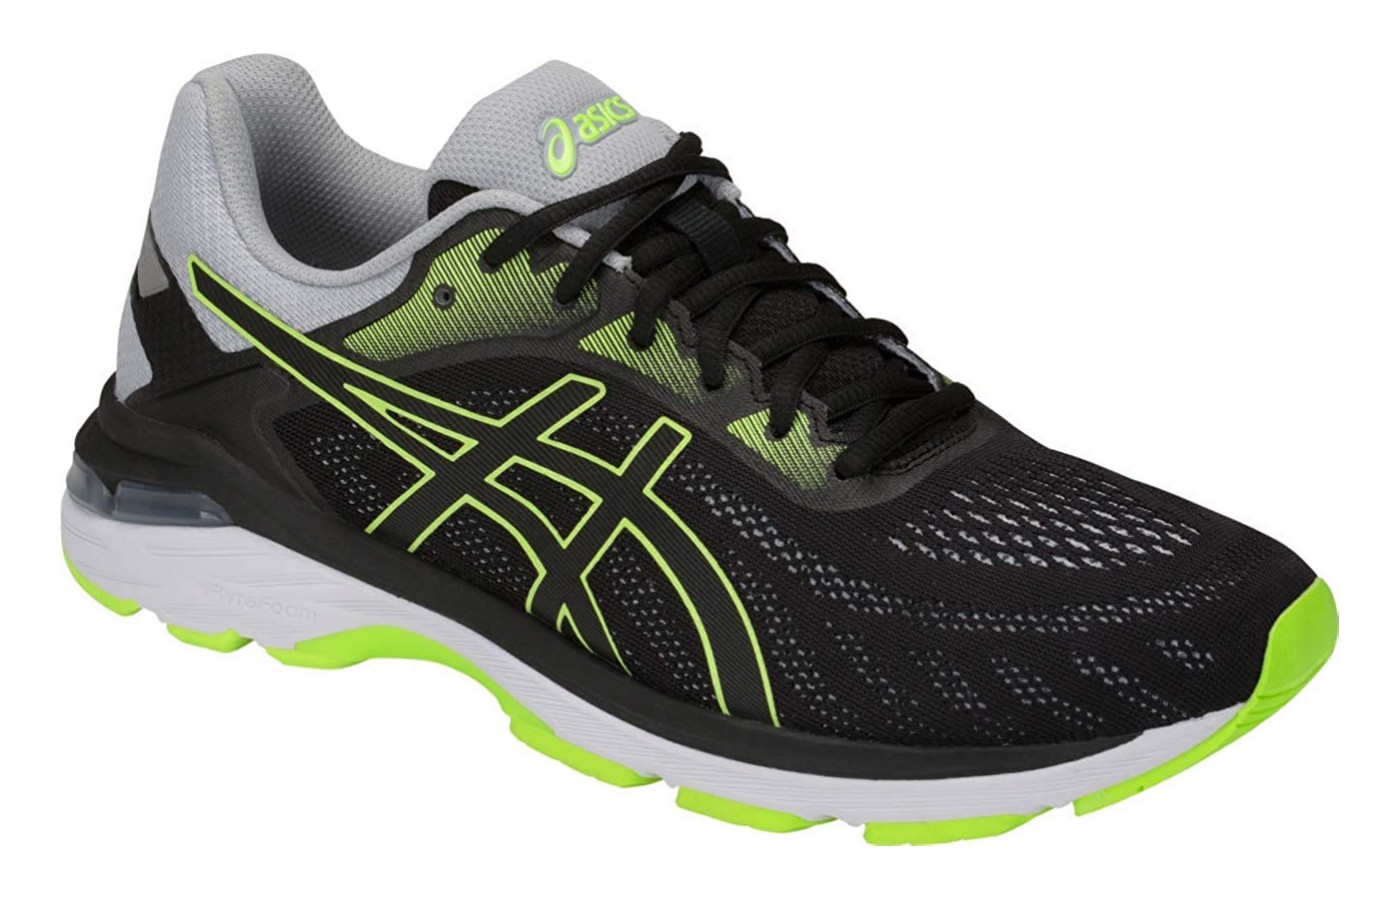 ASICS Gel-Pursue 5 Reviewed \u0026 Rated in 